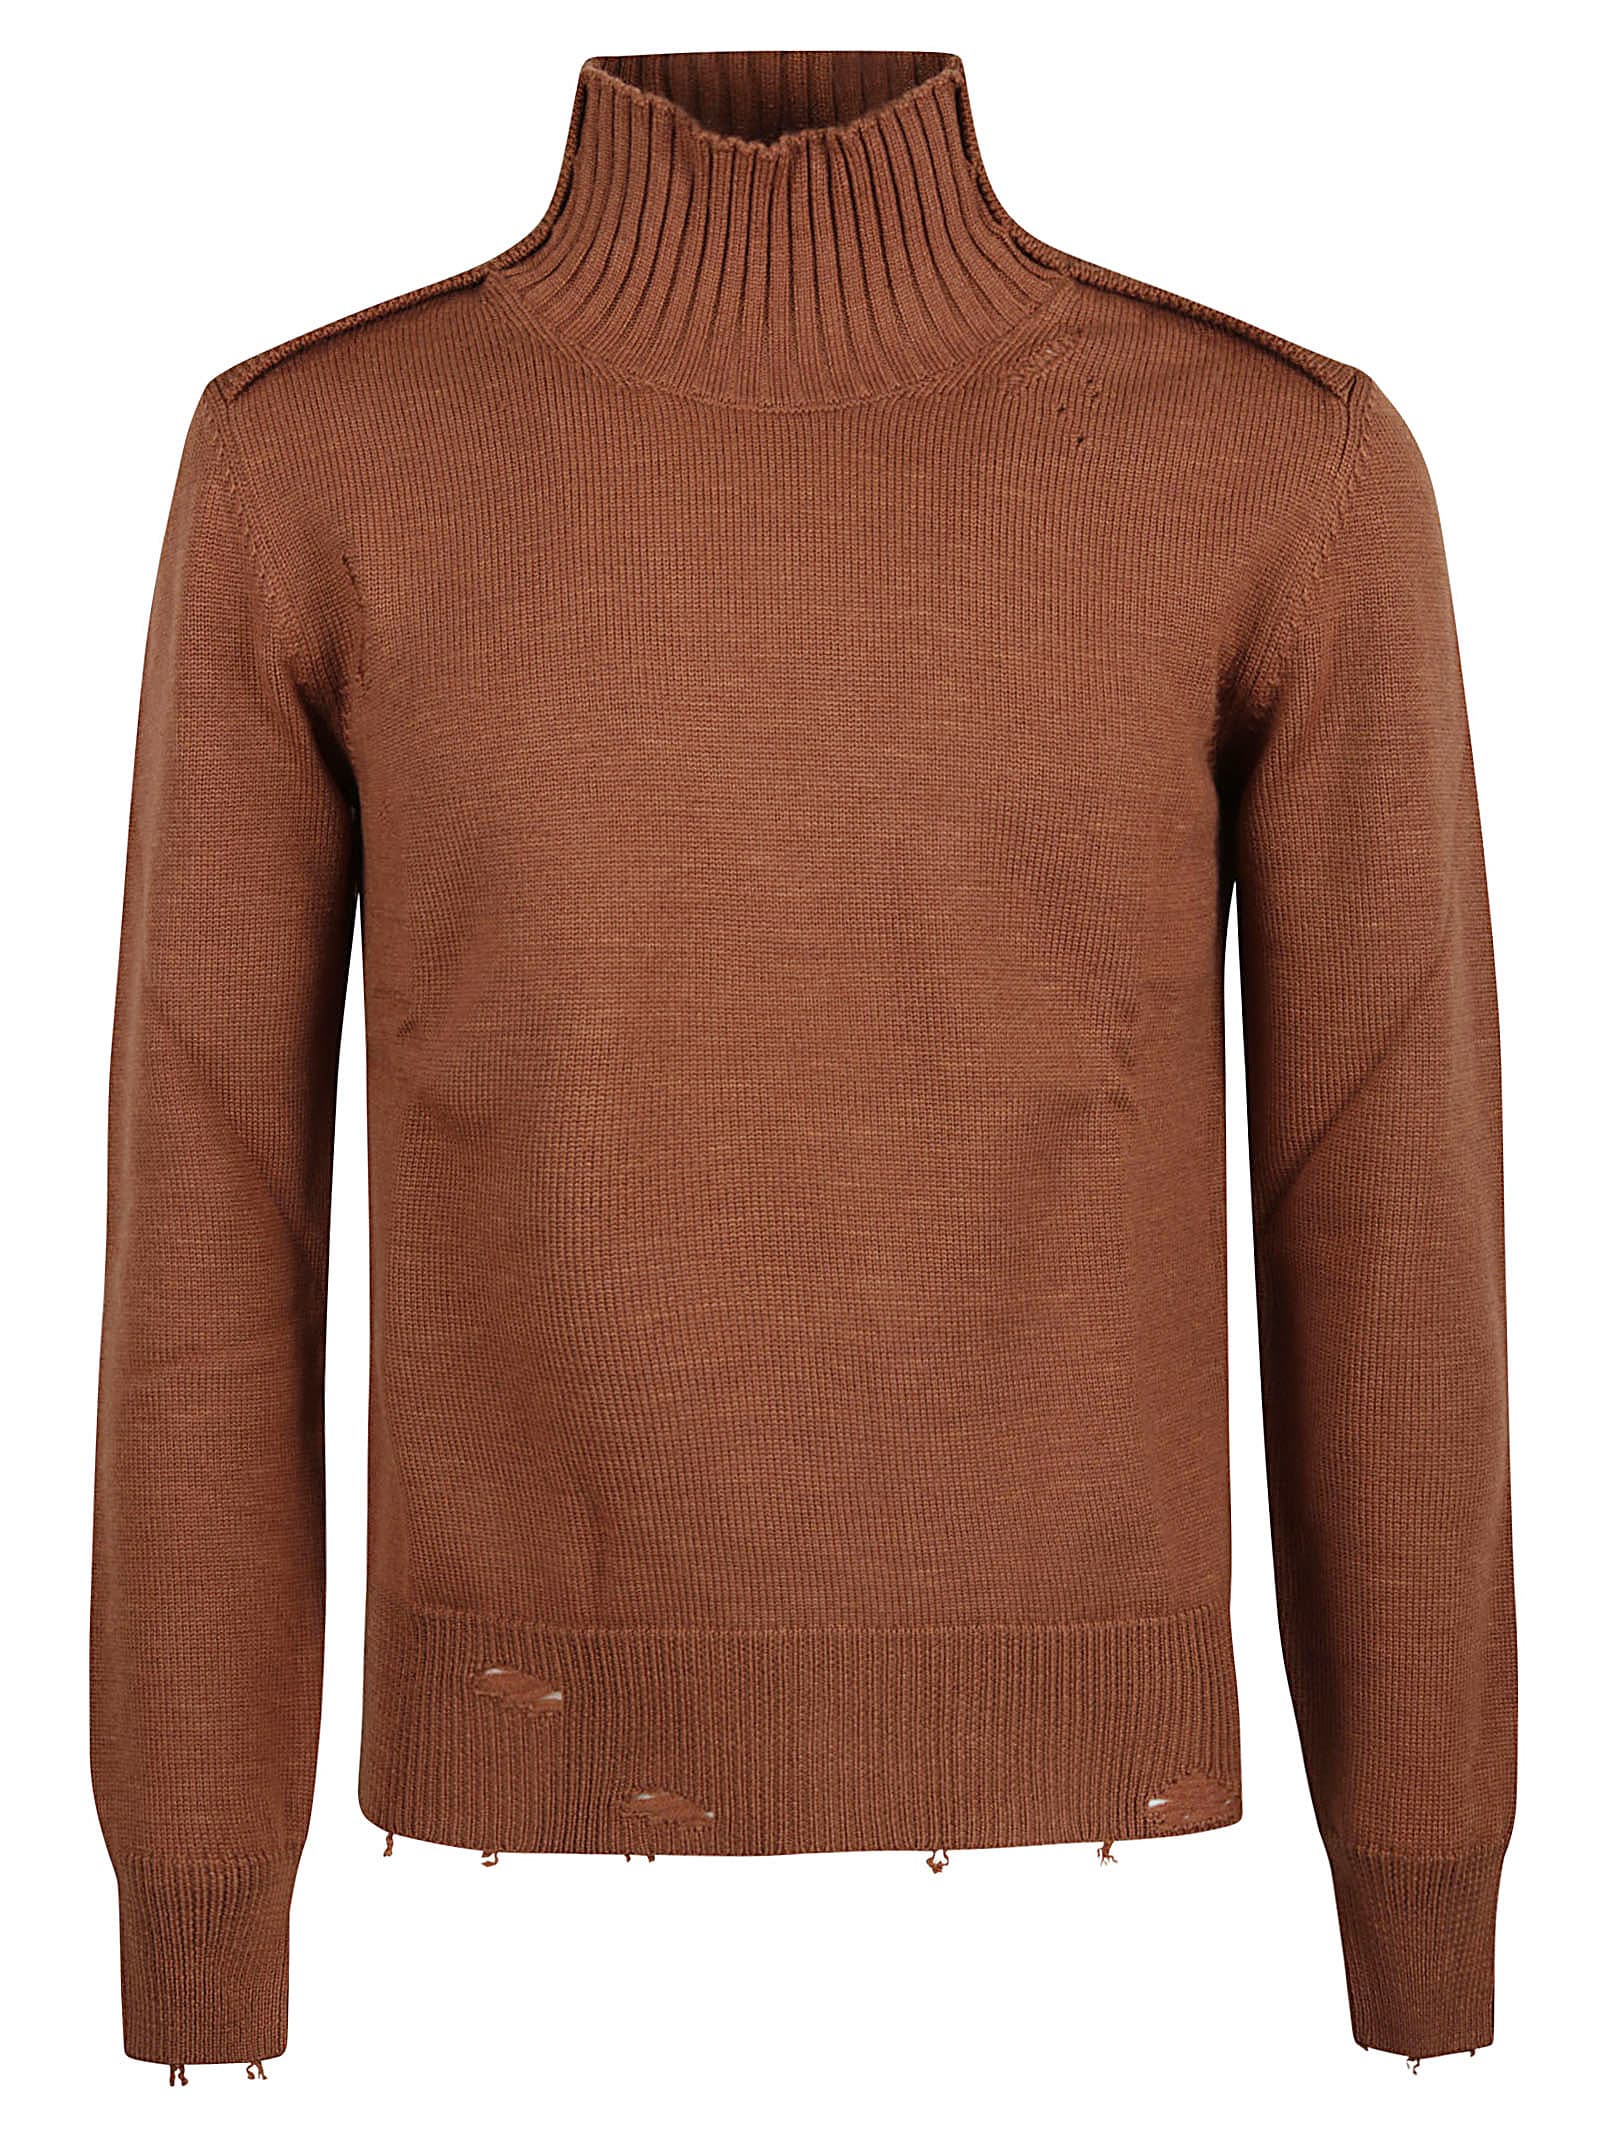 Paolo Pecora Distressed Effect Turtleneck Pullover